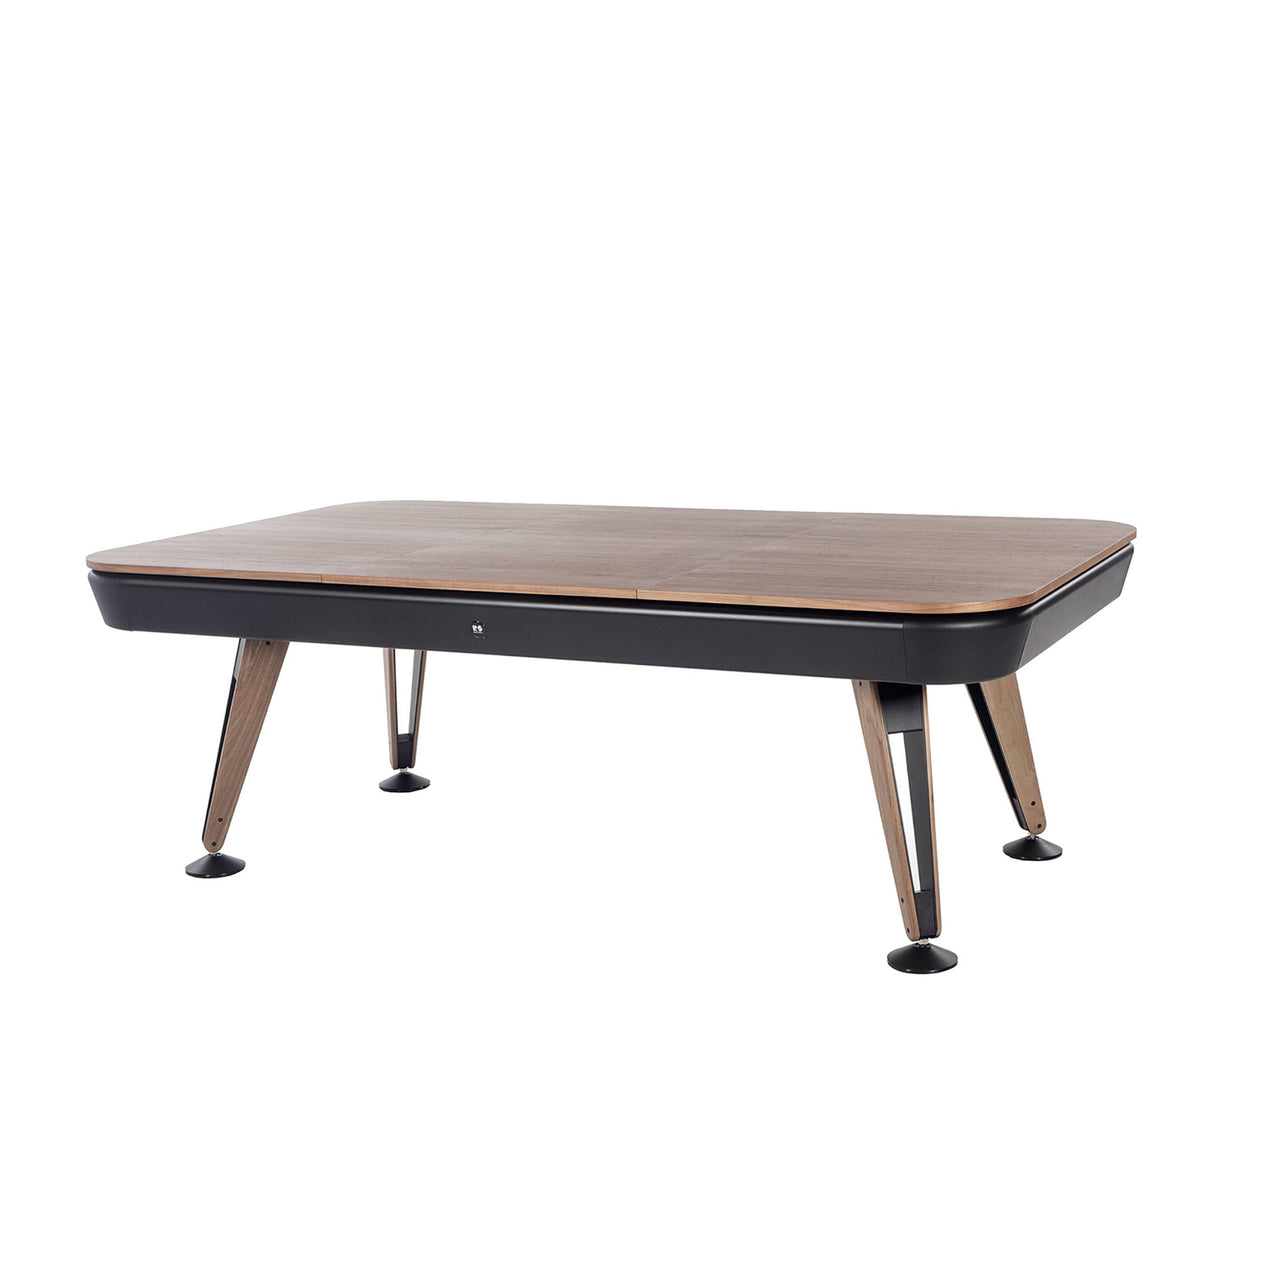 Diagonal Pool Table: Dining Top + Small - 92.7